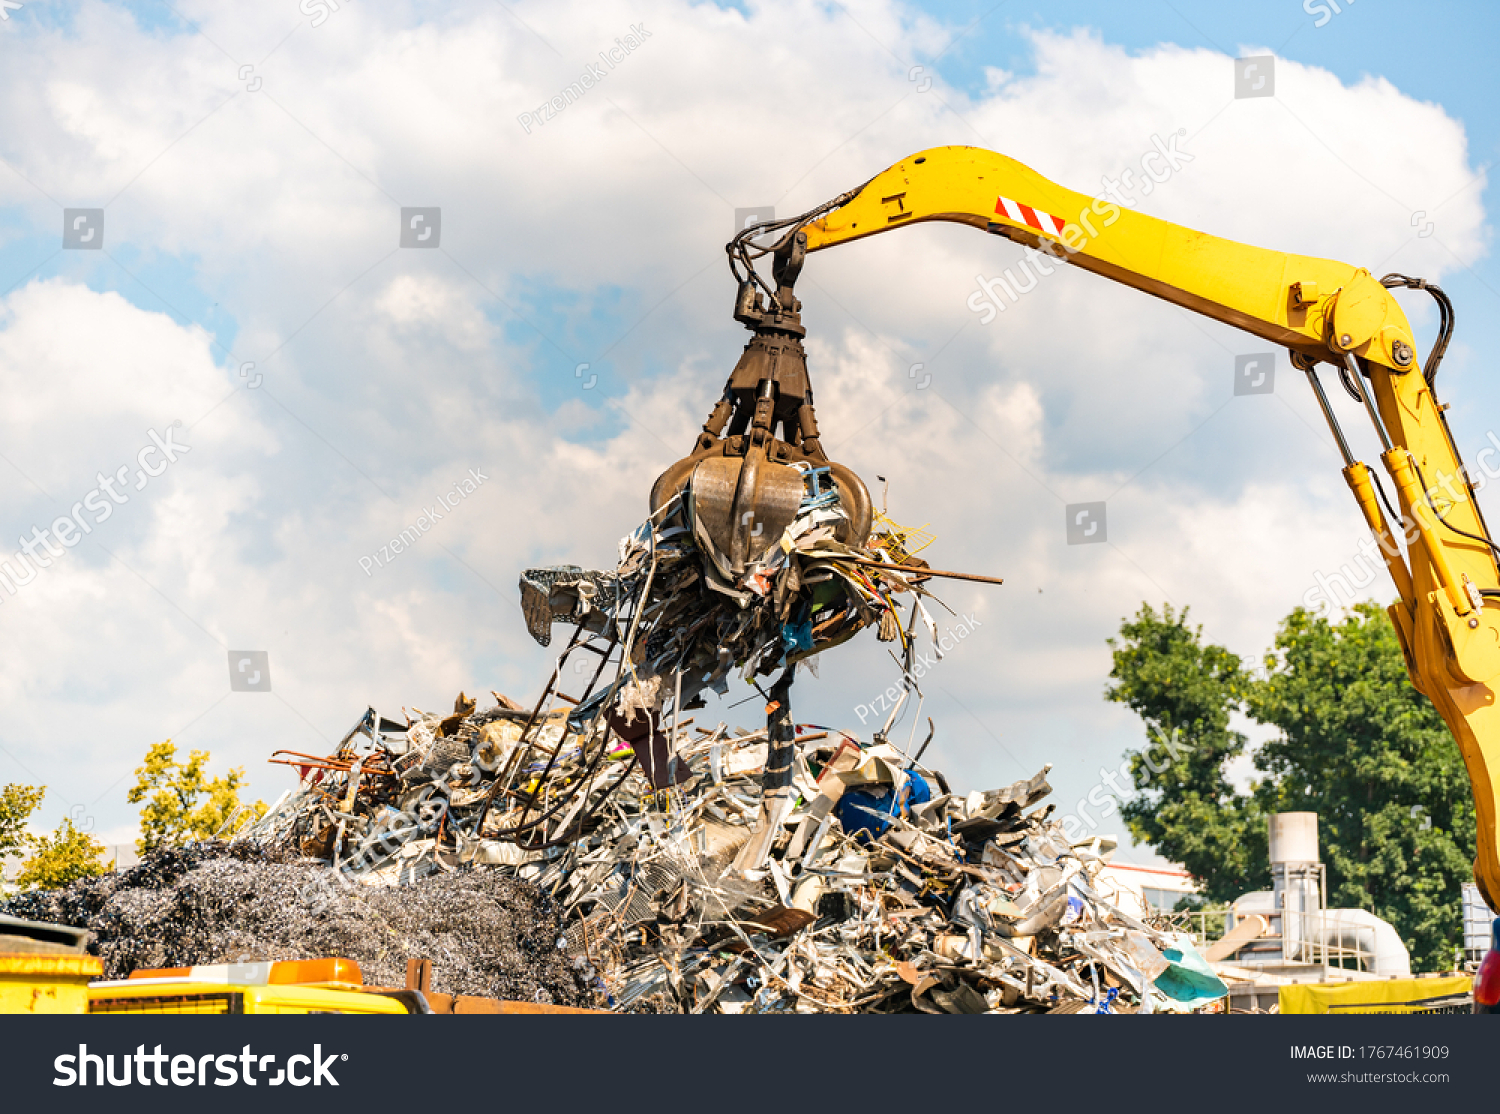 Close-up of a crane for recycling metallic waste on scrapyard #1767461909